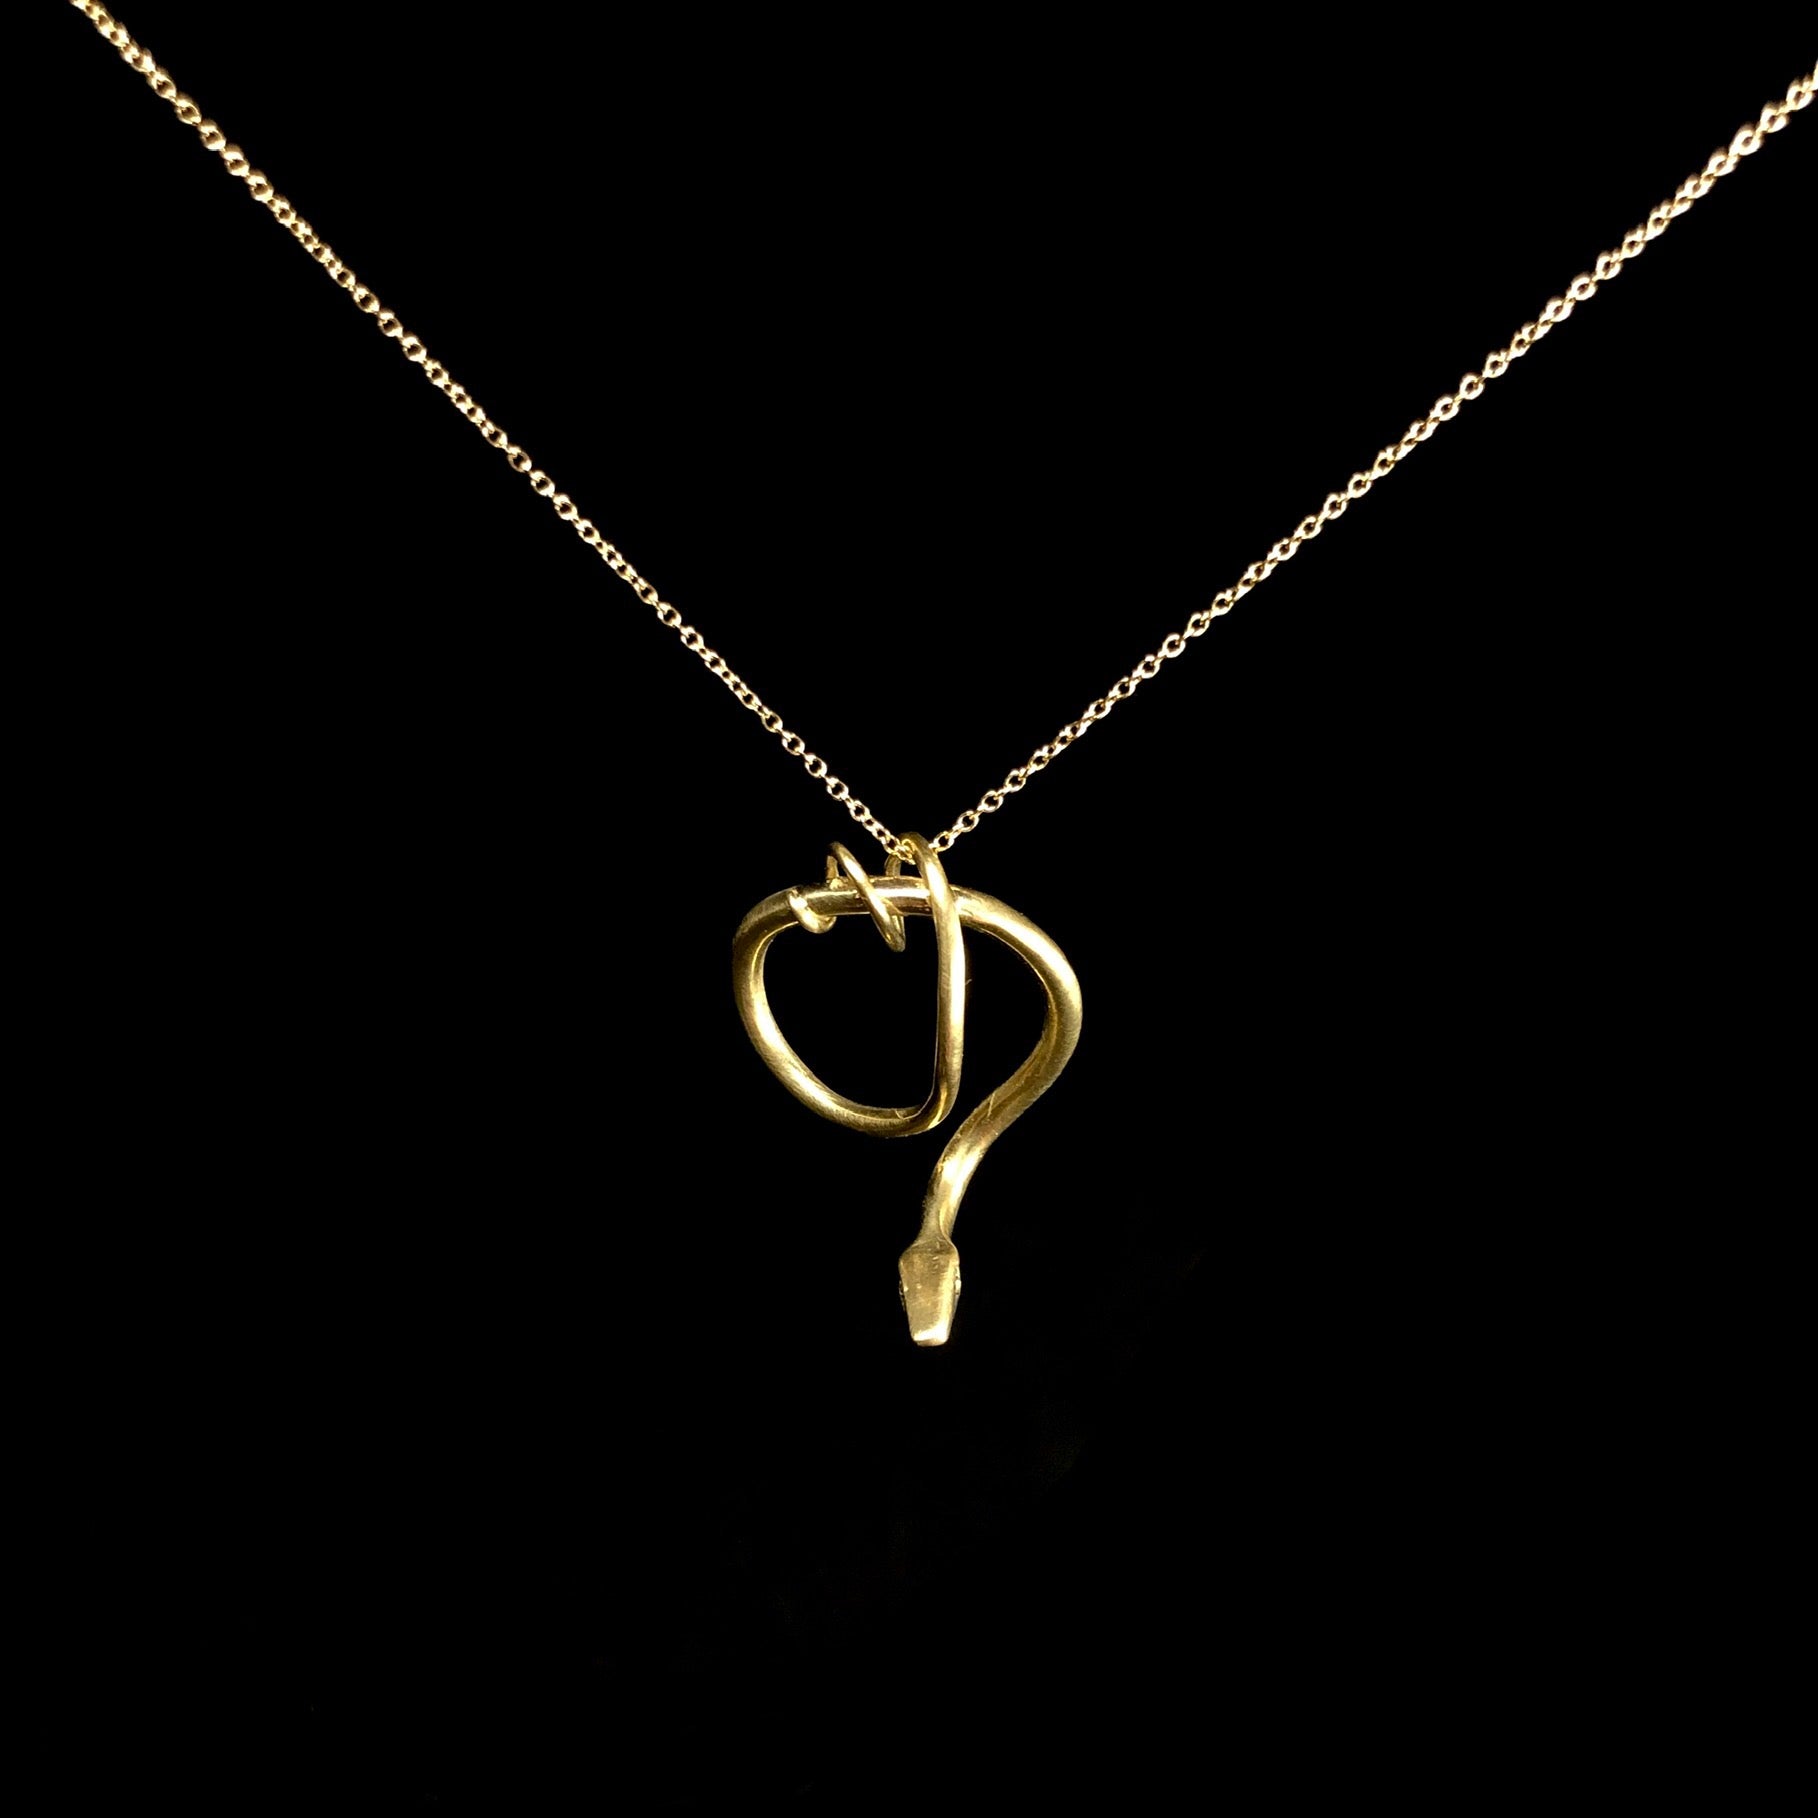 Gold coiled and twisted snake on gold chain